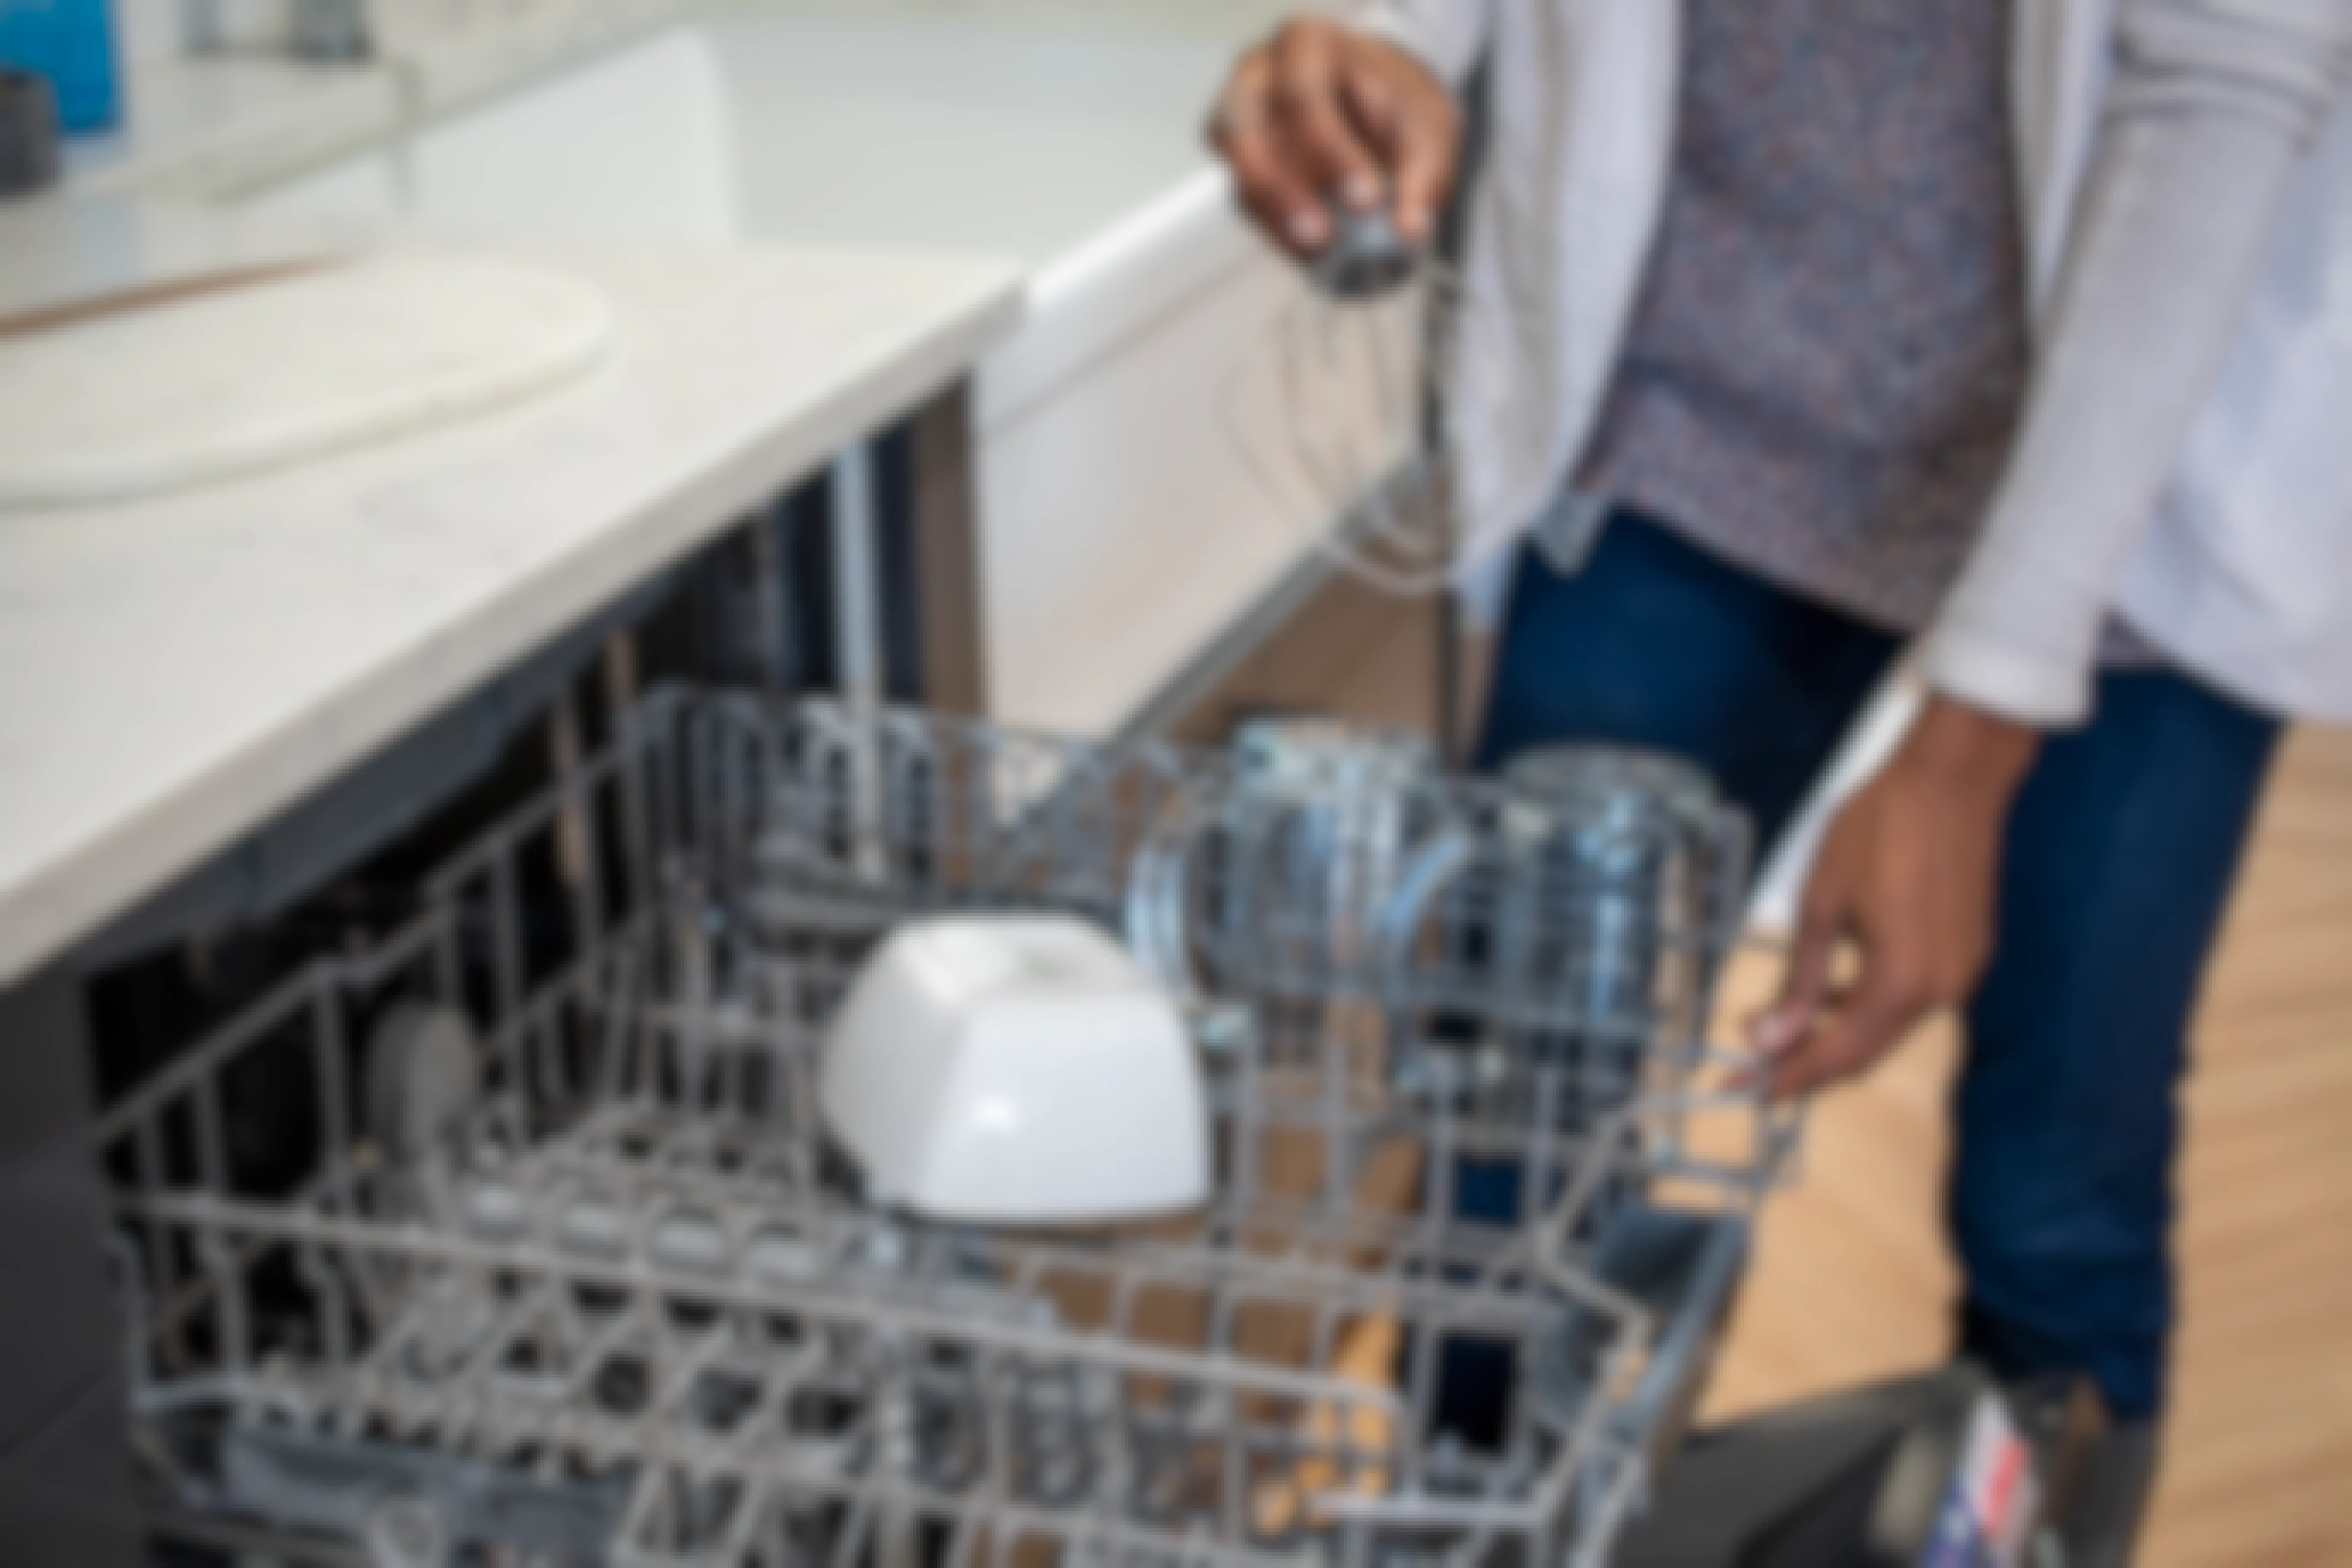 How to Save on Dishwasher Cleaners